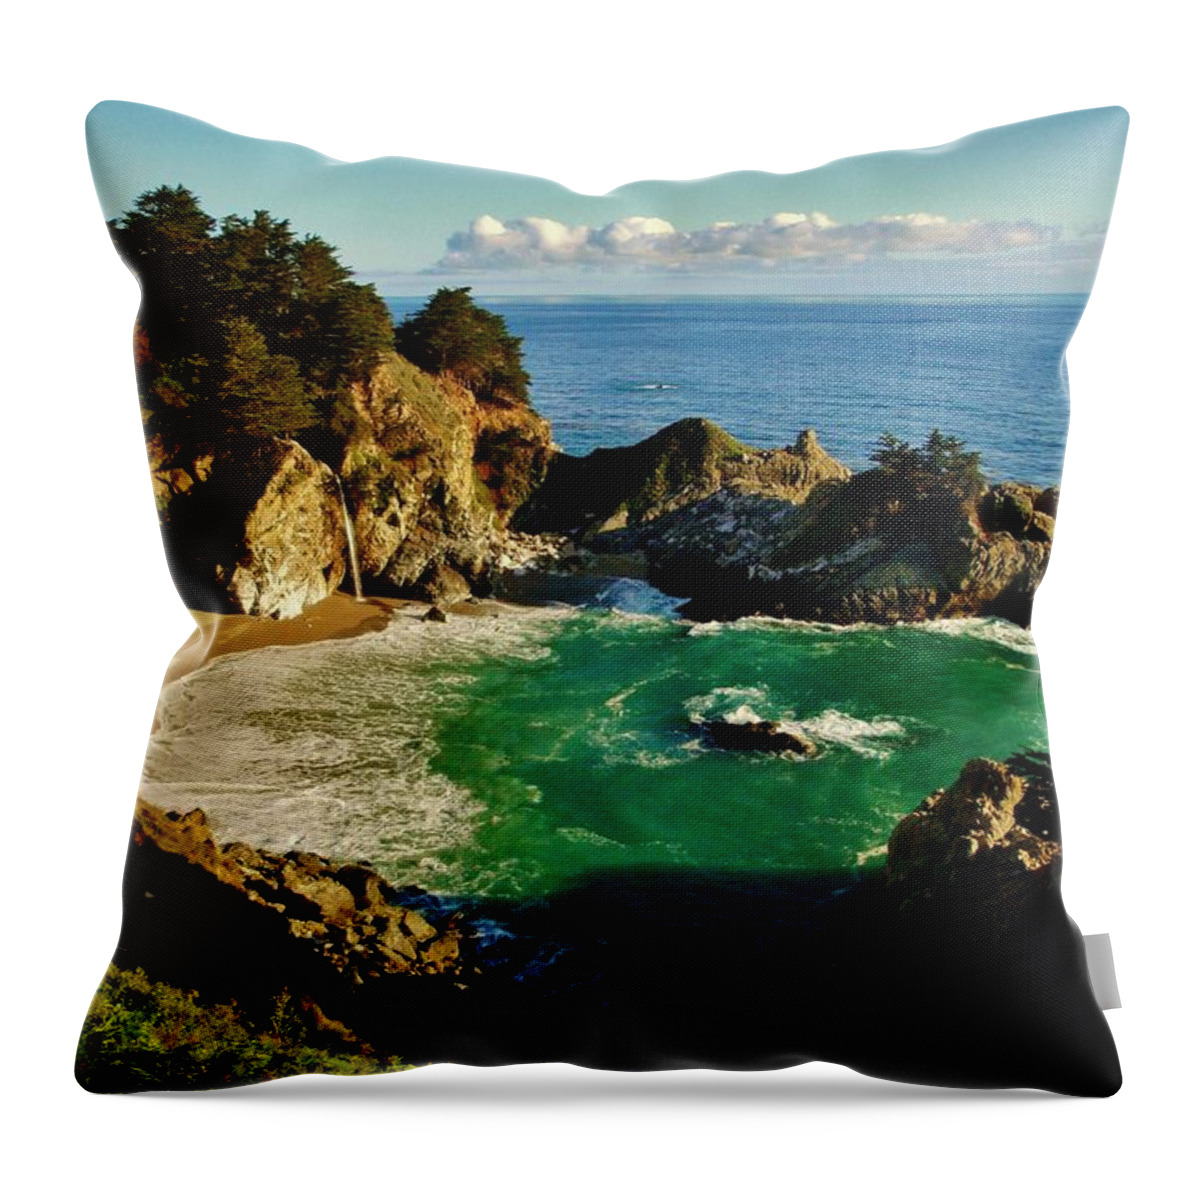 Big Sur Throw Pillow featuring the photograph Big Sur by Benjamin Yeager